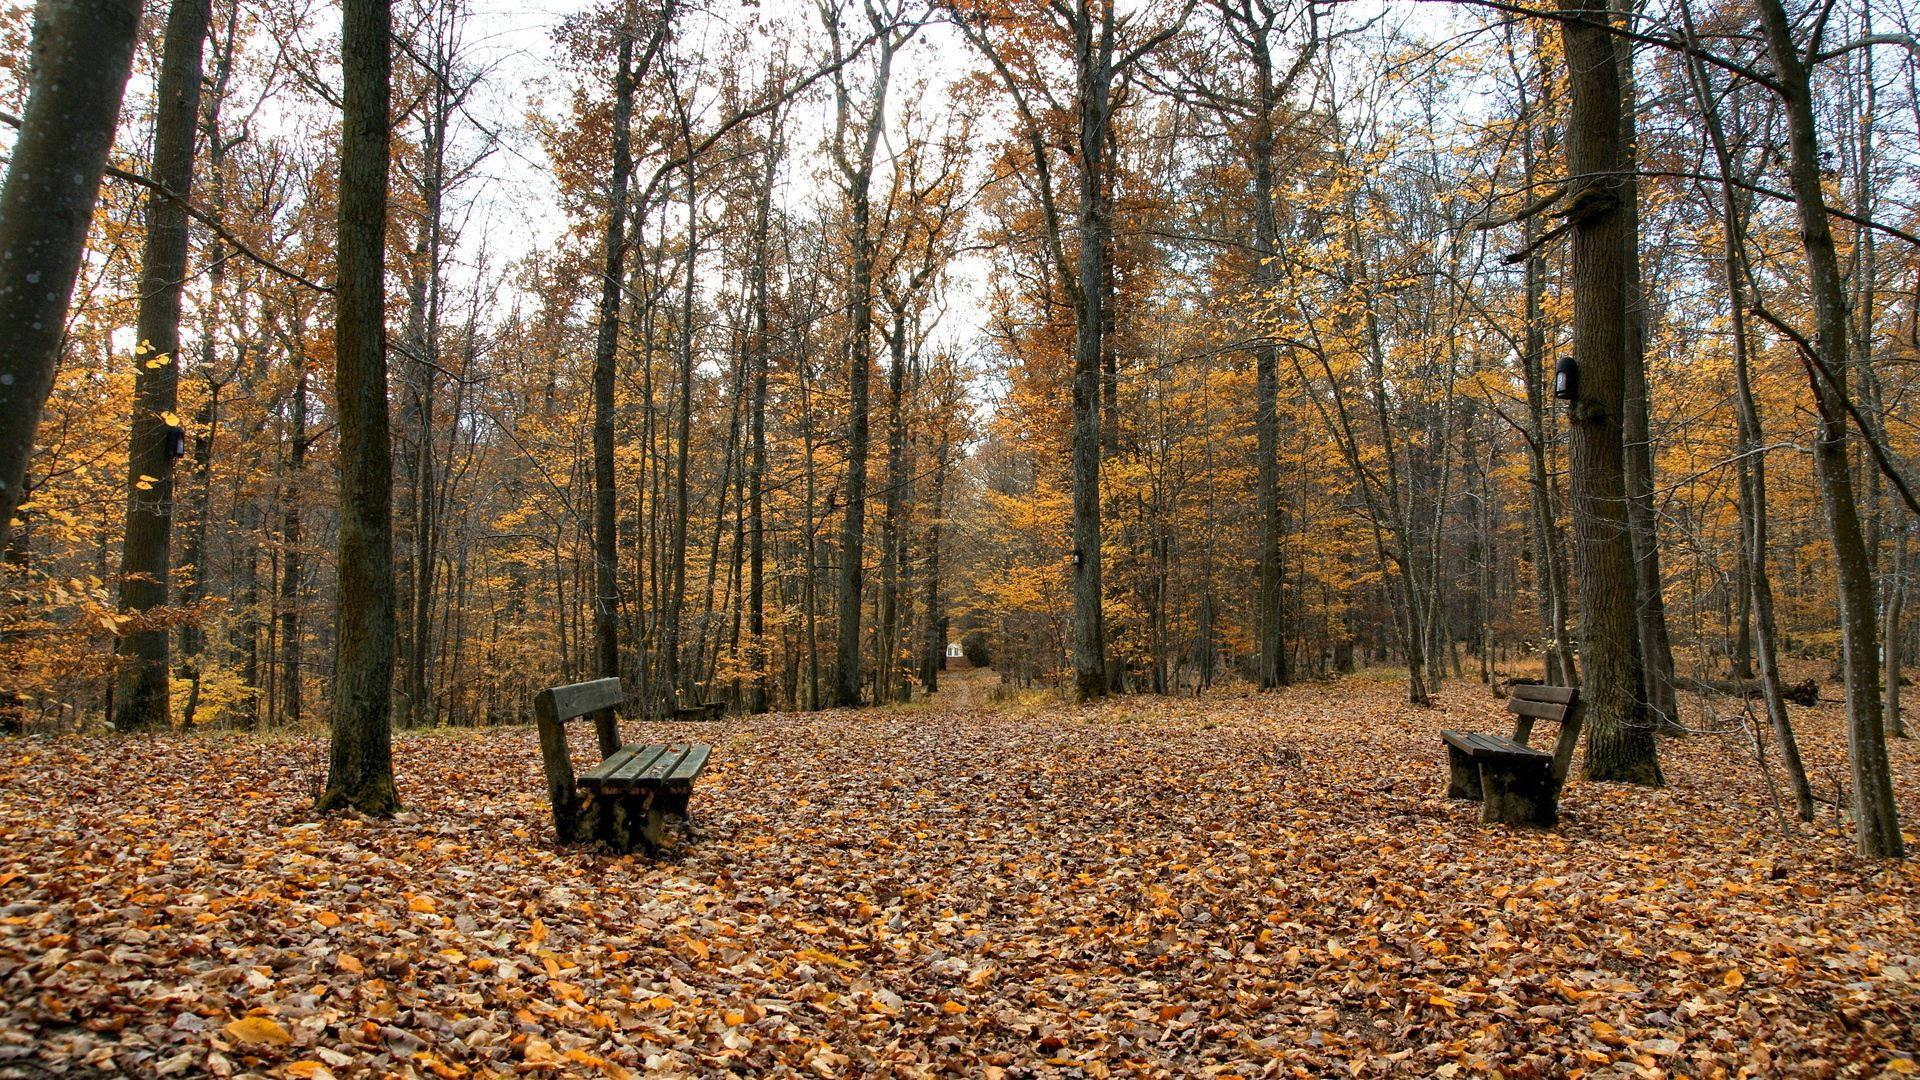 Benches On Fallen Leaves